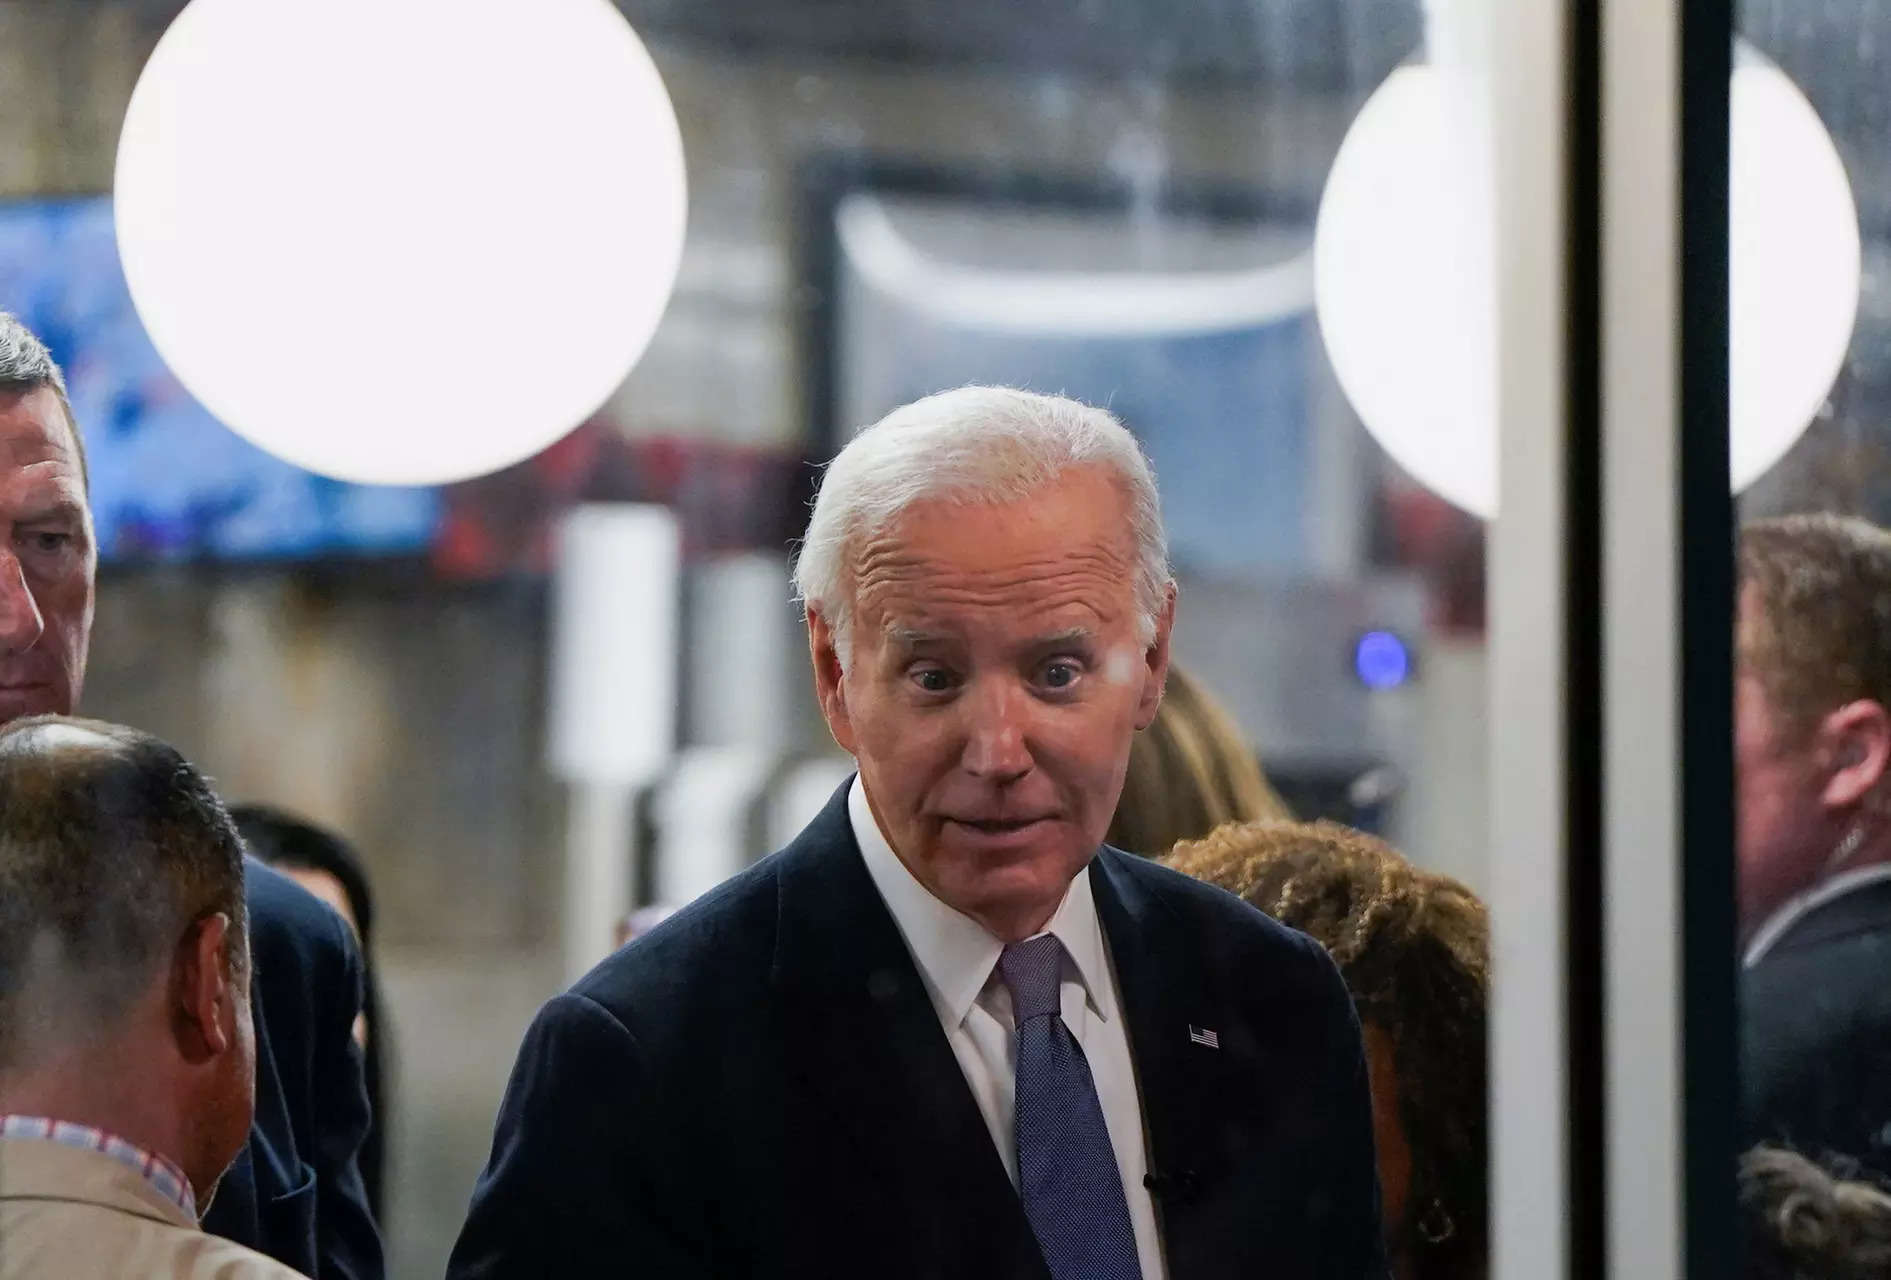 Is Joe Biden a ‘10am-4pm’ president? New details emerge on how the White House has been active in shielding the president 